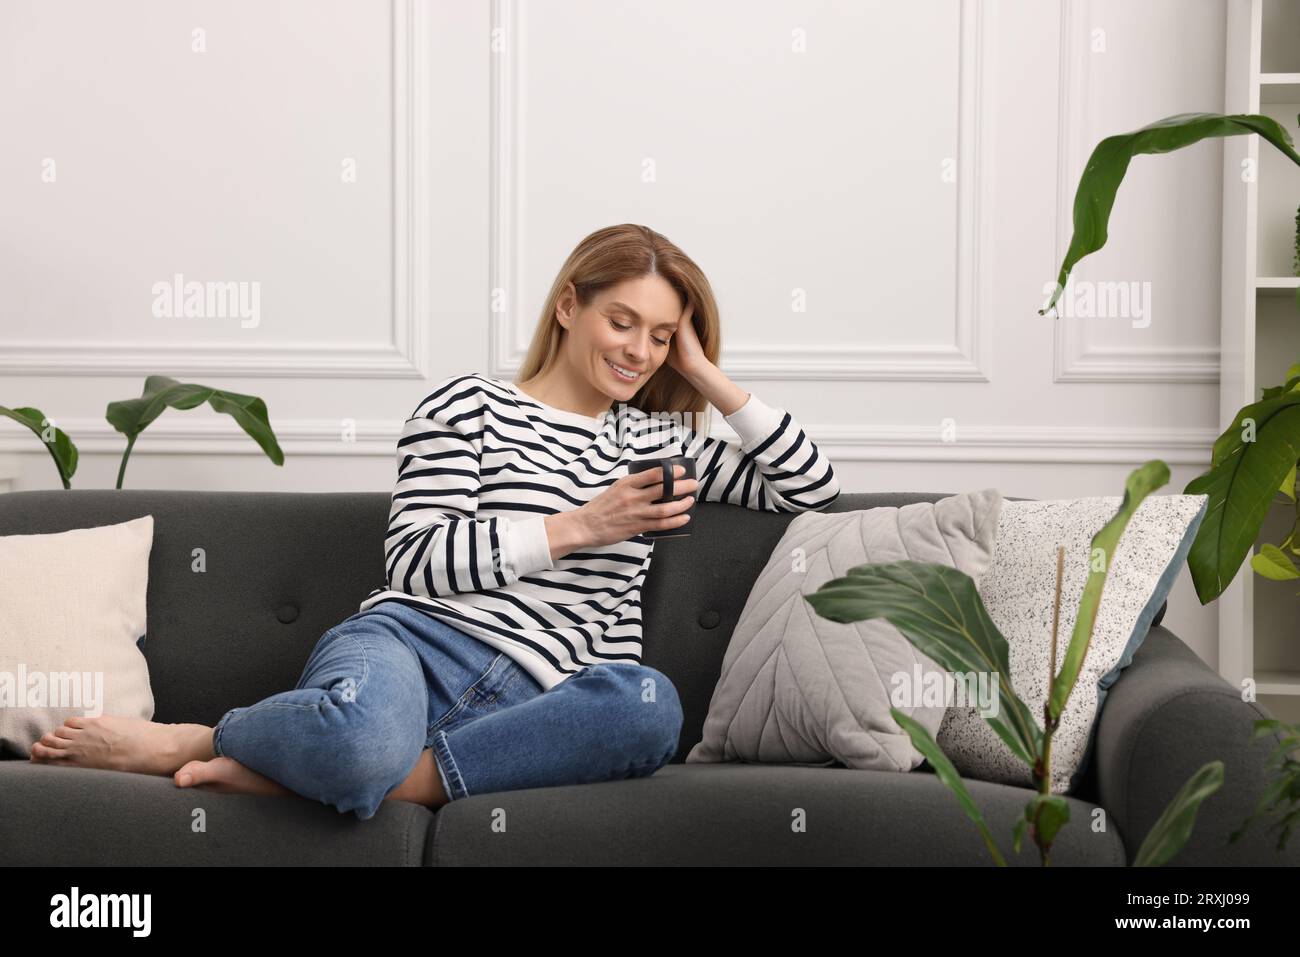 A Comfy Couch With Pillows Surrounded By Houseplants Stock Photo